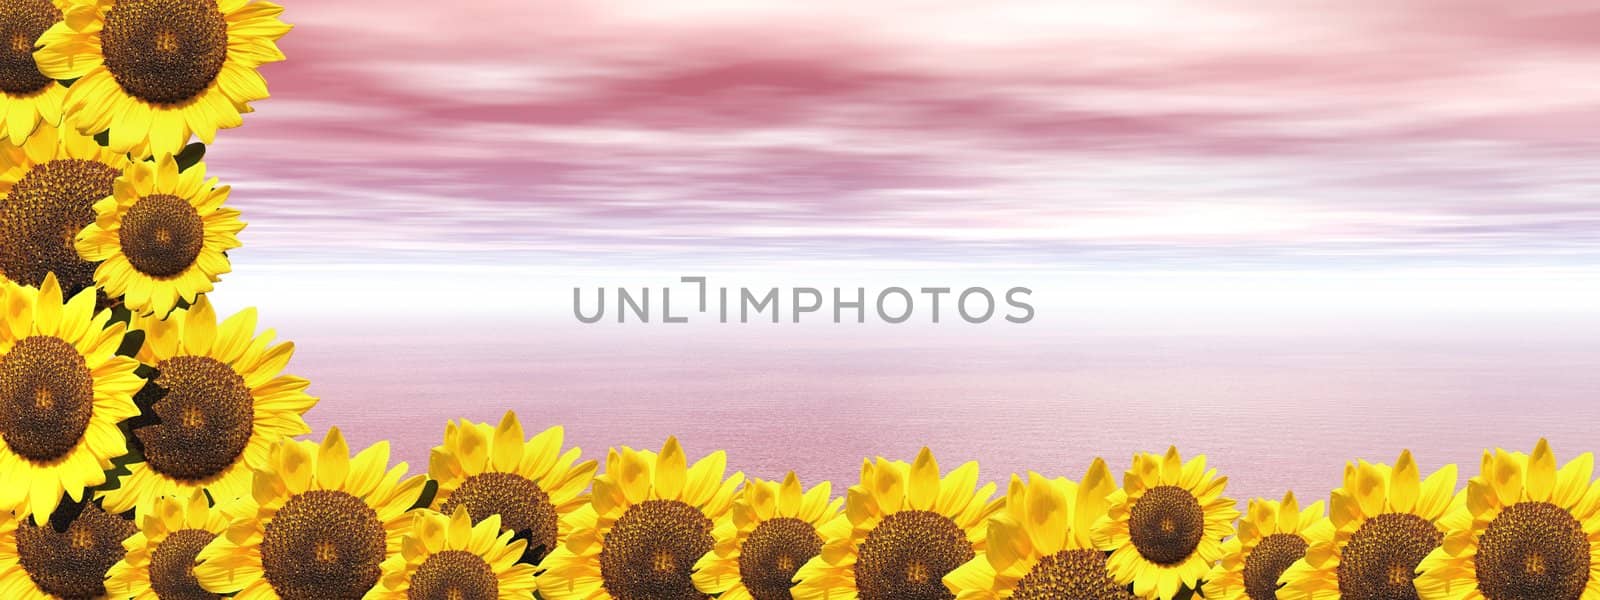 Pink ocean and sunflowers by Elenaphotos21